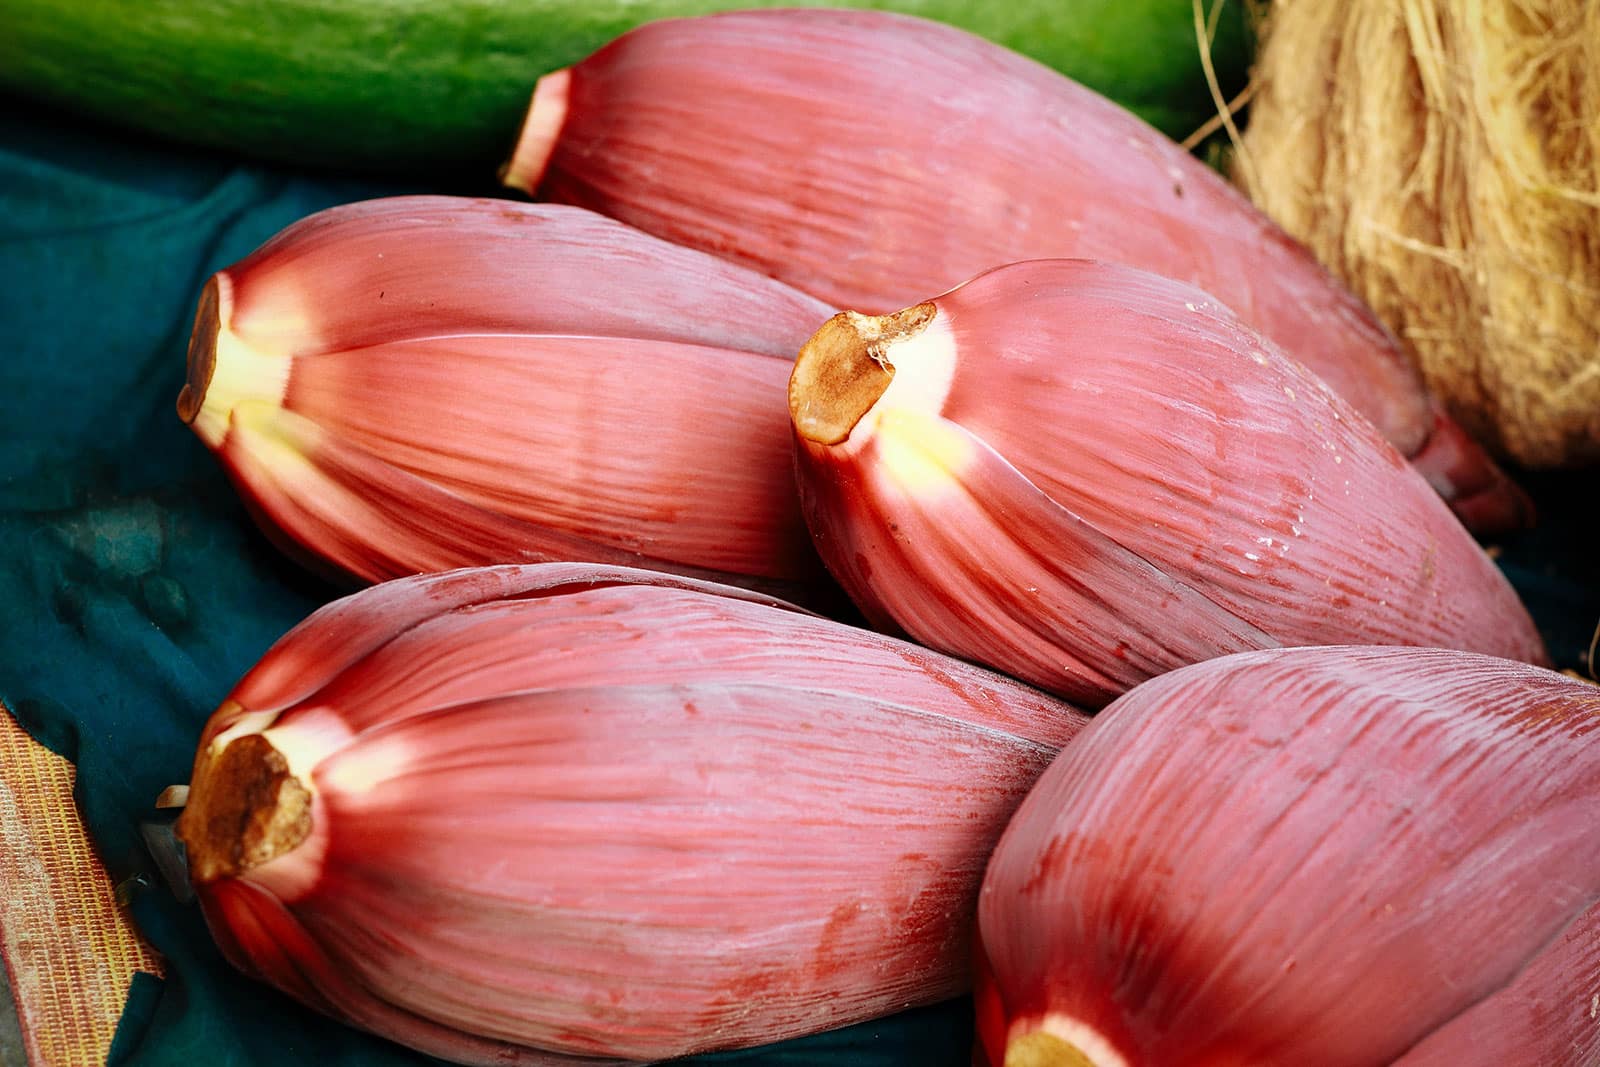 Maroon-colored banana flowers piled together at a market